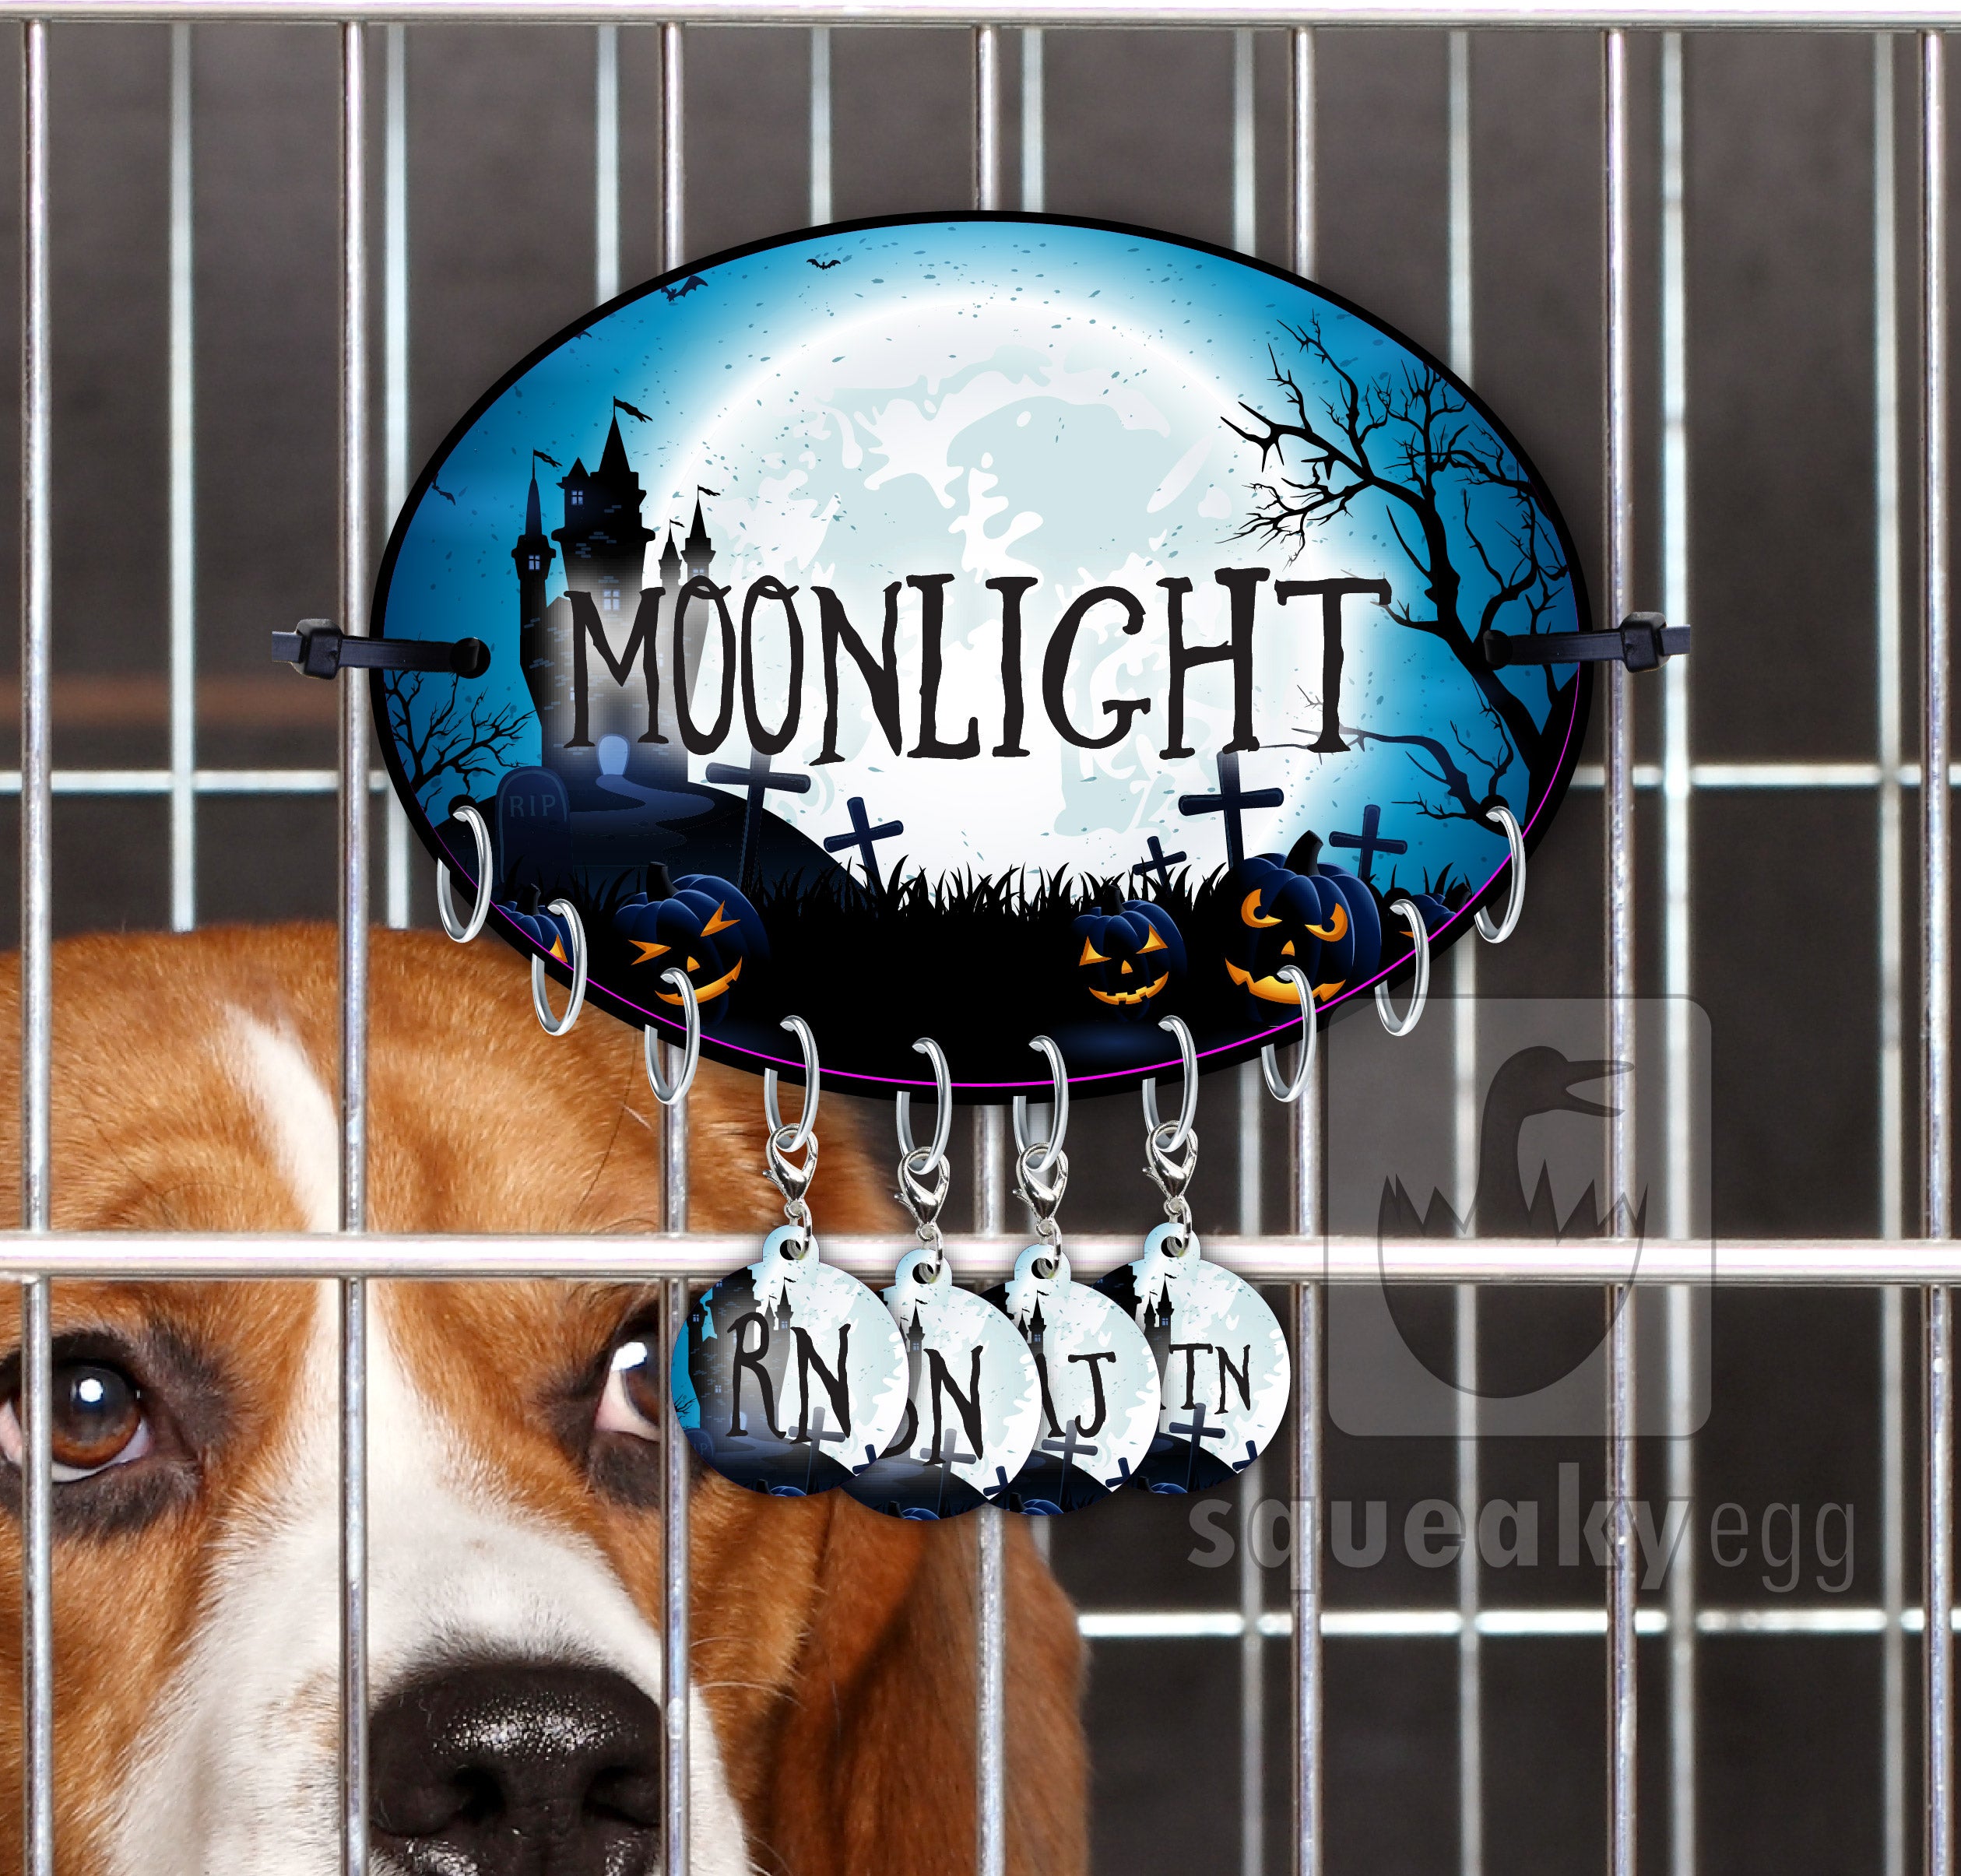 Moonlight - Crate Tag